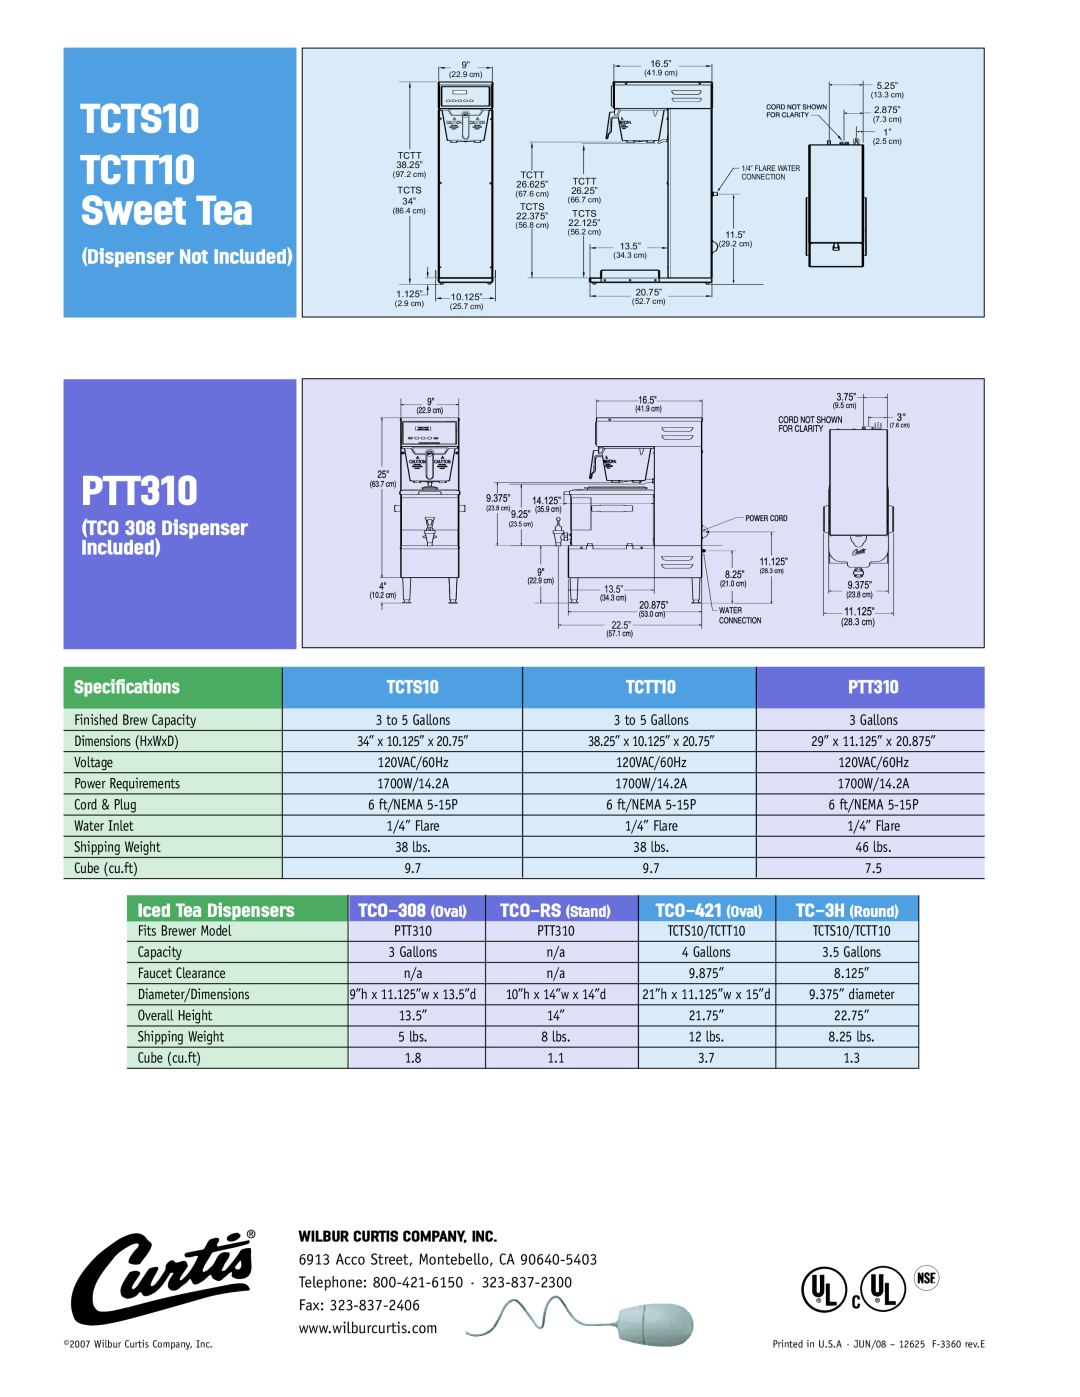 Curtis TCTS10 Dispenser Not Included, TCO 308 Dispenser, PTT310, TCTT10 Sweet Tea, Specifications, Iced Tea Dispensers 